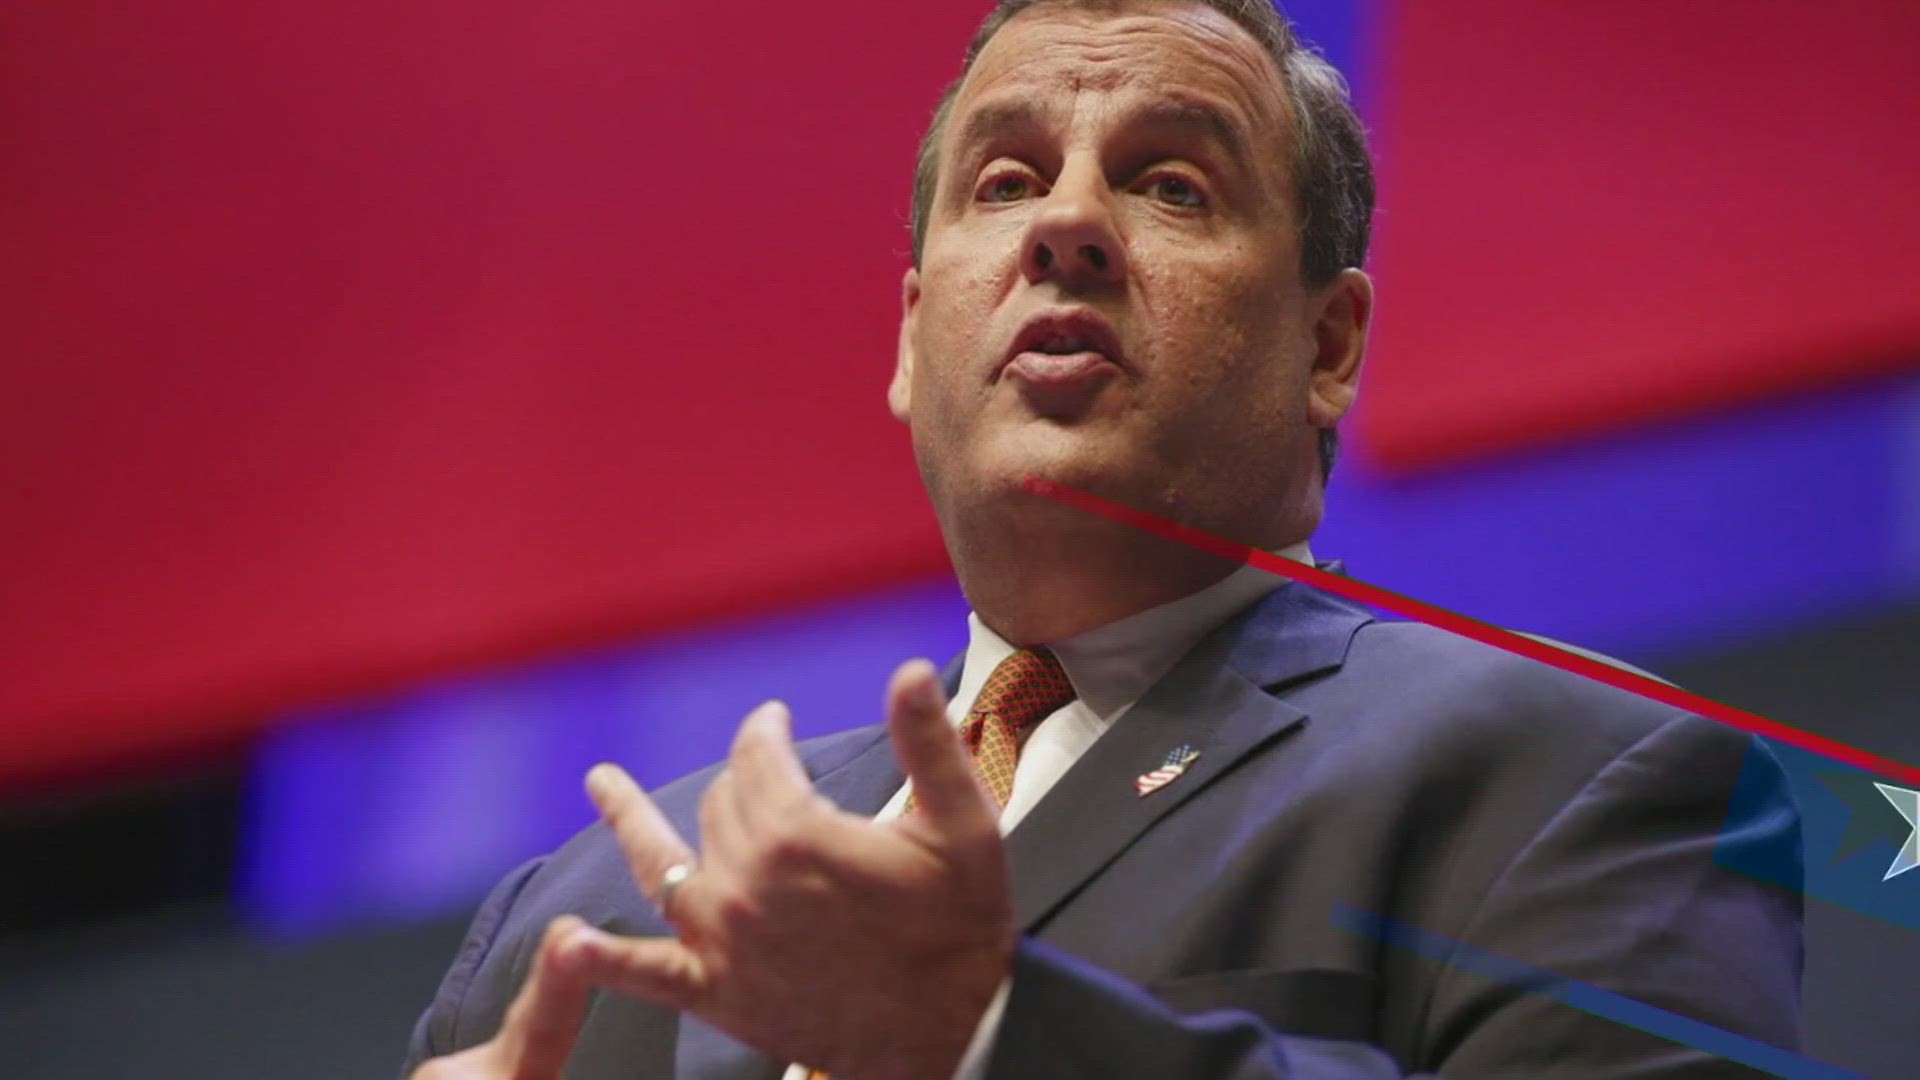 Former New Jersey Governor Chris Christie is expected to join an already crowded group of candidates seeking the nomination.